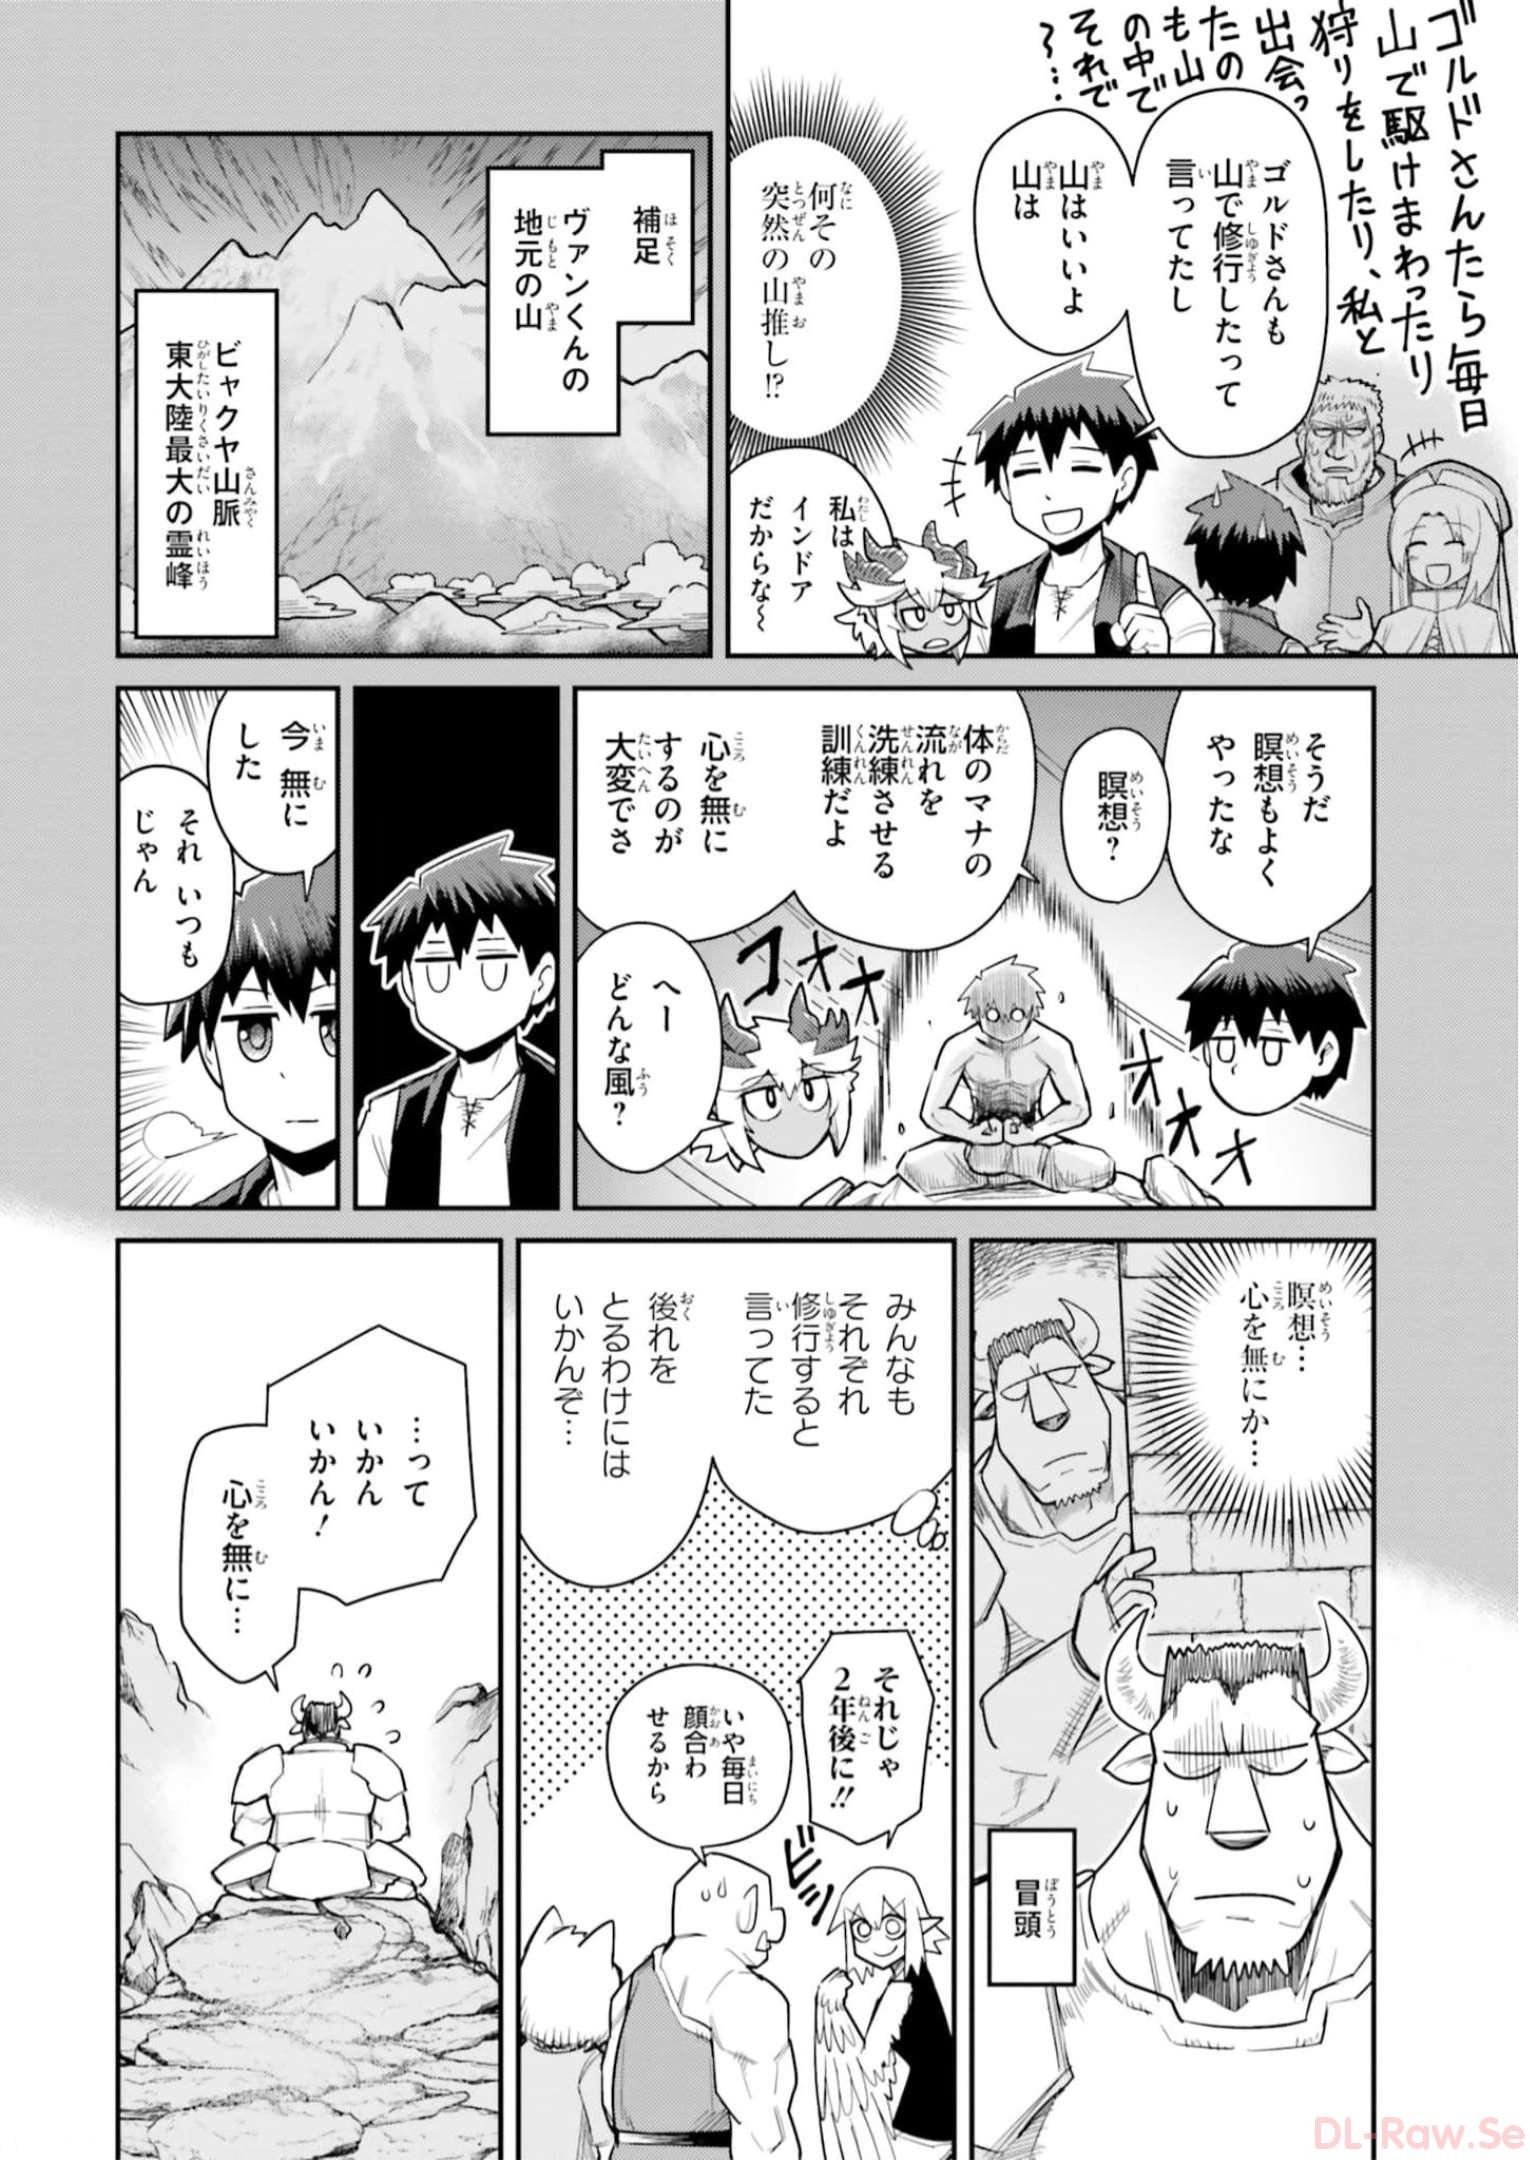 Dungeon Friends Forever Dungeon's Childhood Friend ダンジョンの幼なじみ 第11話 - Page 4